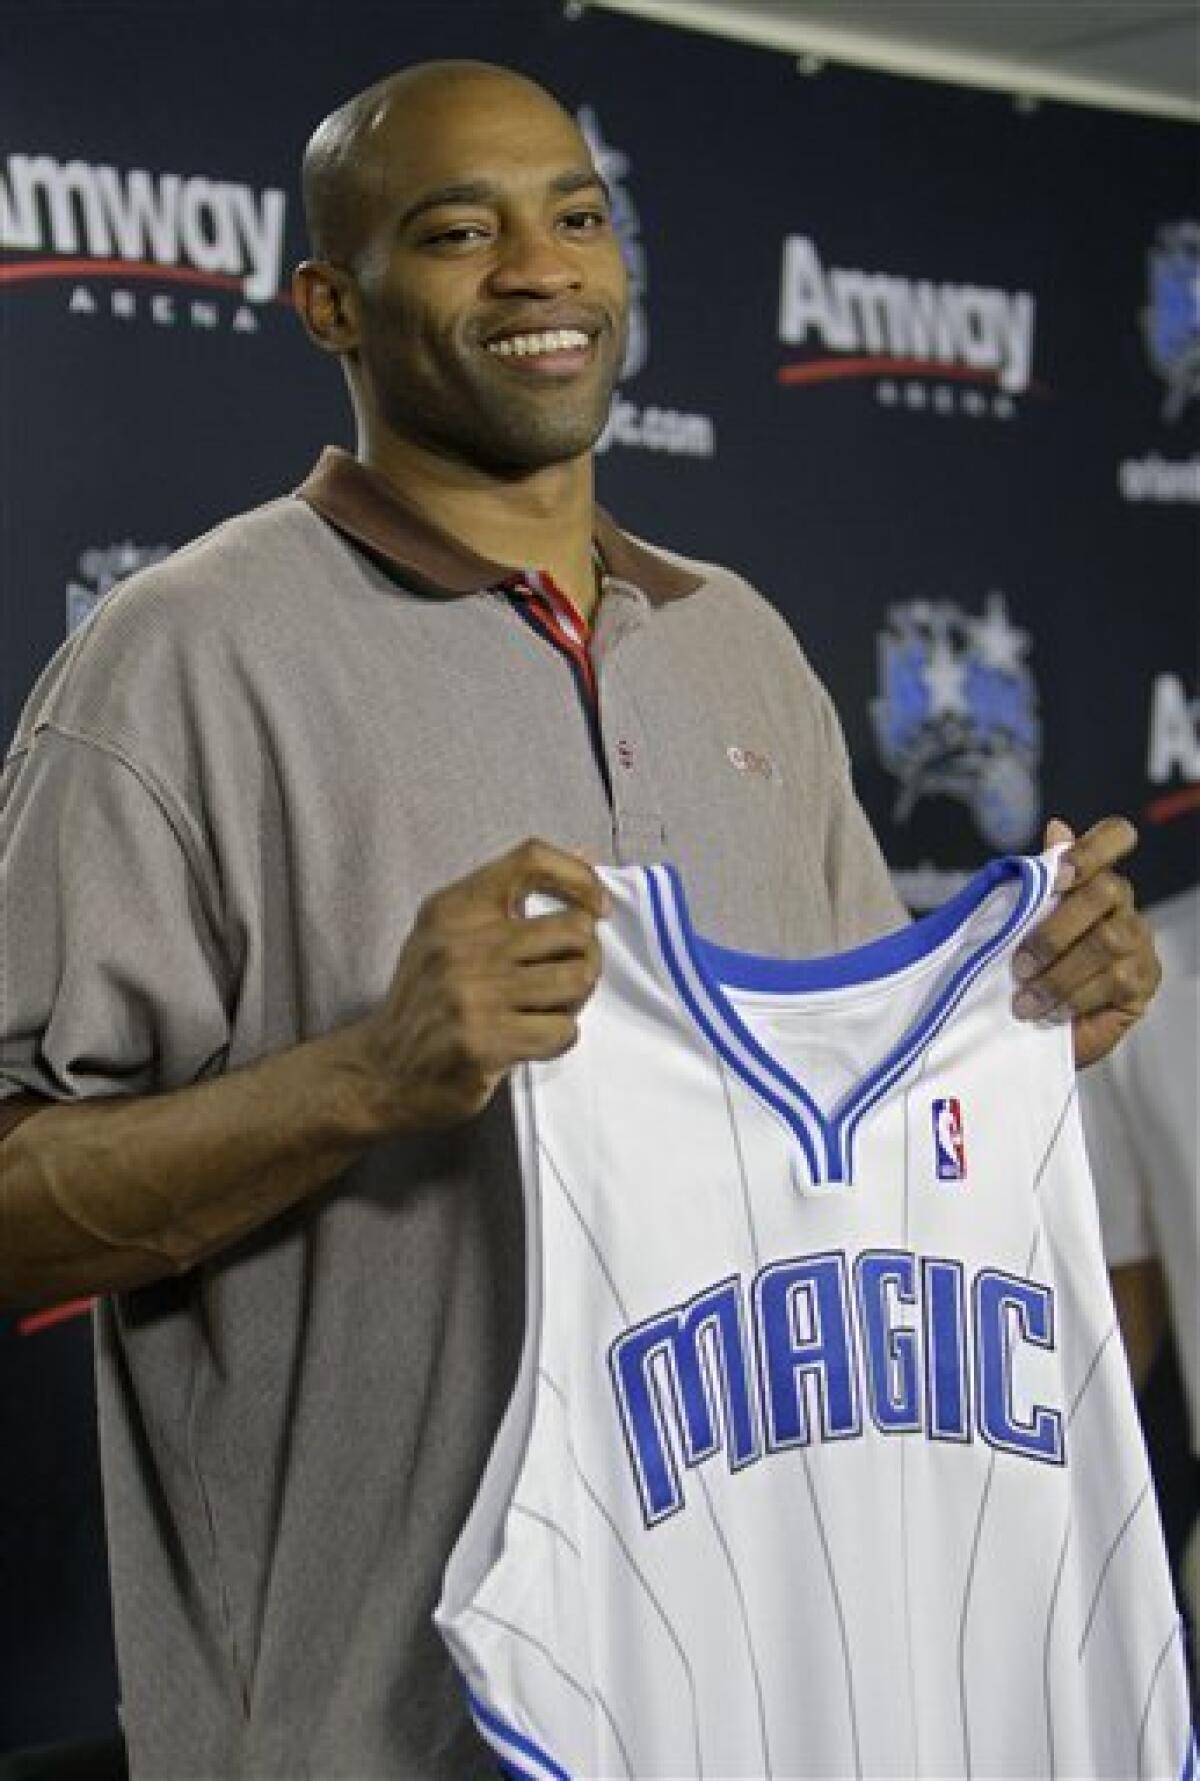 Brooklyn Nets - On this date 15 years ago, the Nets traded for Vince Carter  🙌